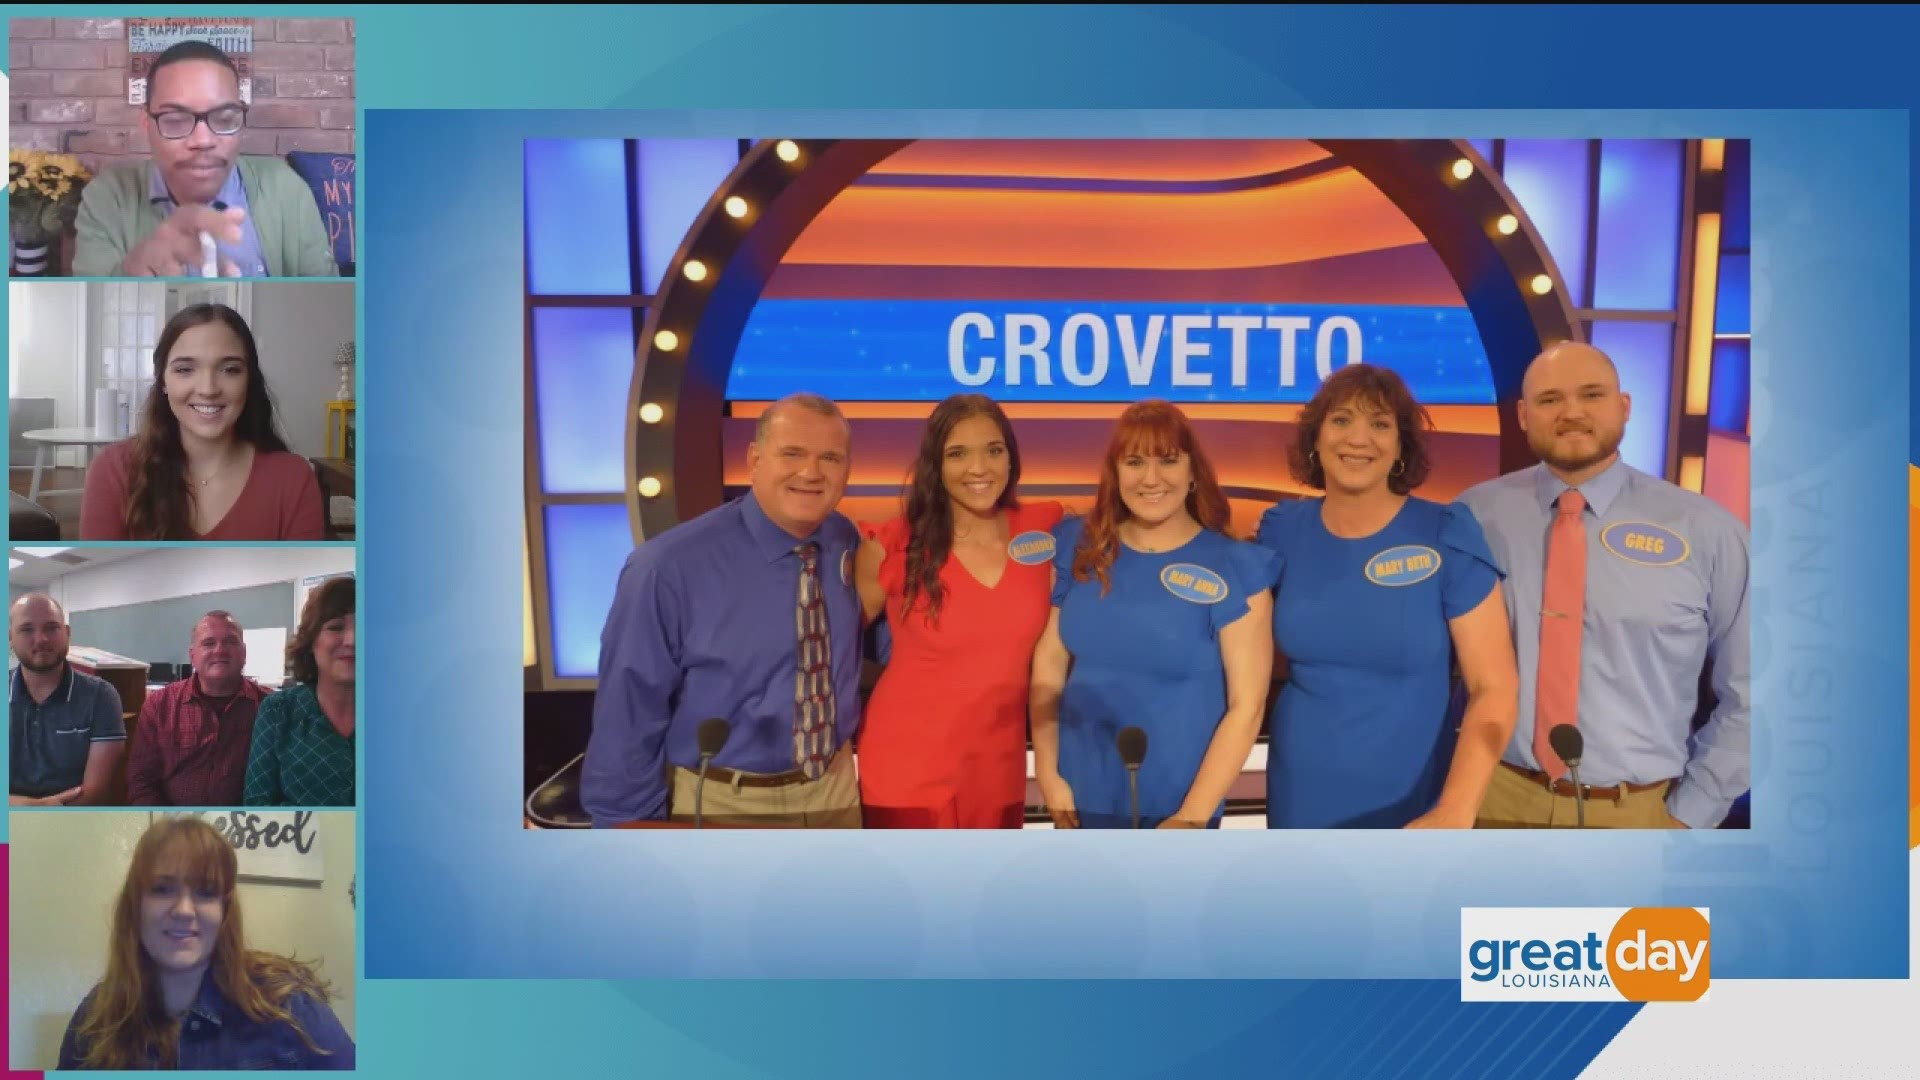 The Crovetto family discussed their recent appearance on "The Family Feud." Watch them at 9:30 a.m. on WUPL-TV on Tuesday, November 17.